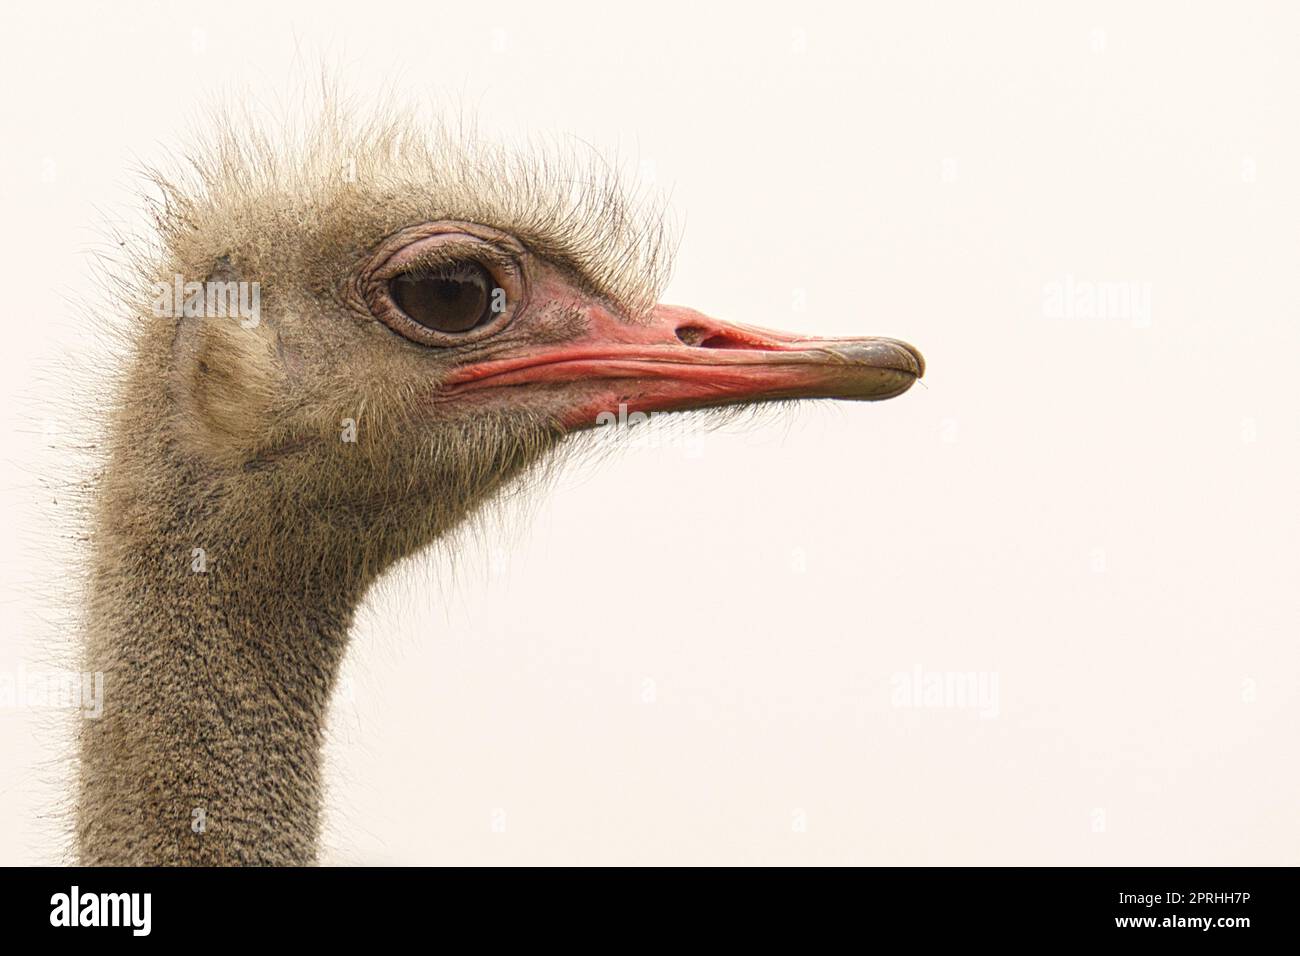 Ostrich in profile. The largest bird in the world. White neck, red beak. Stock Photo